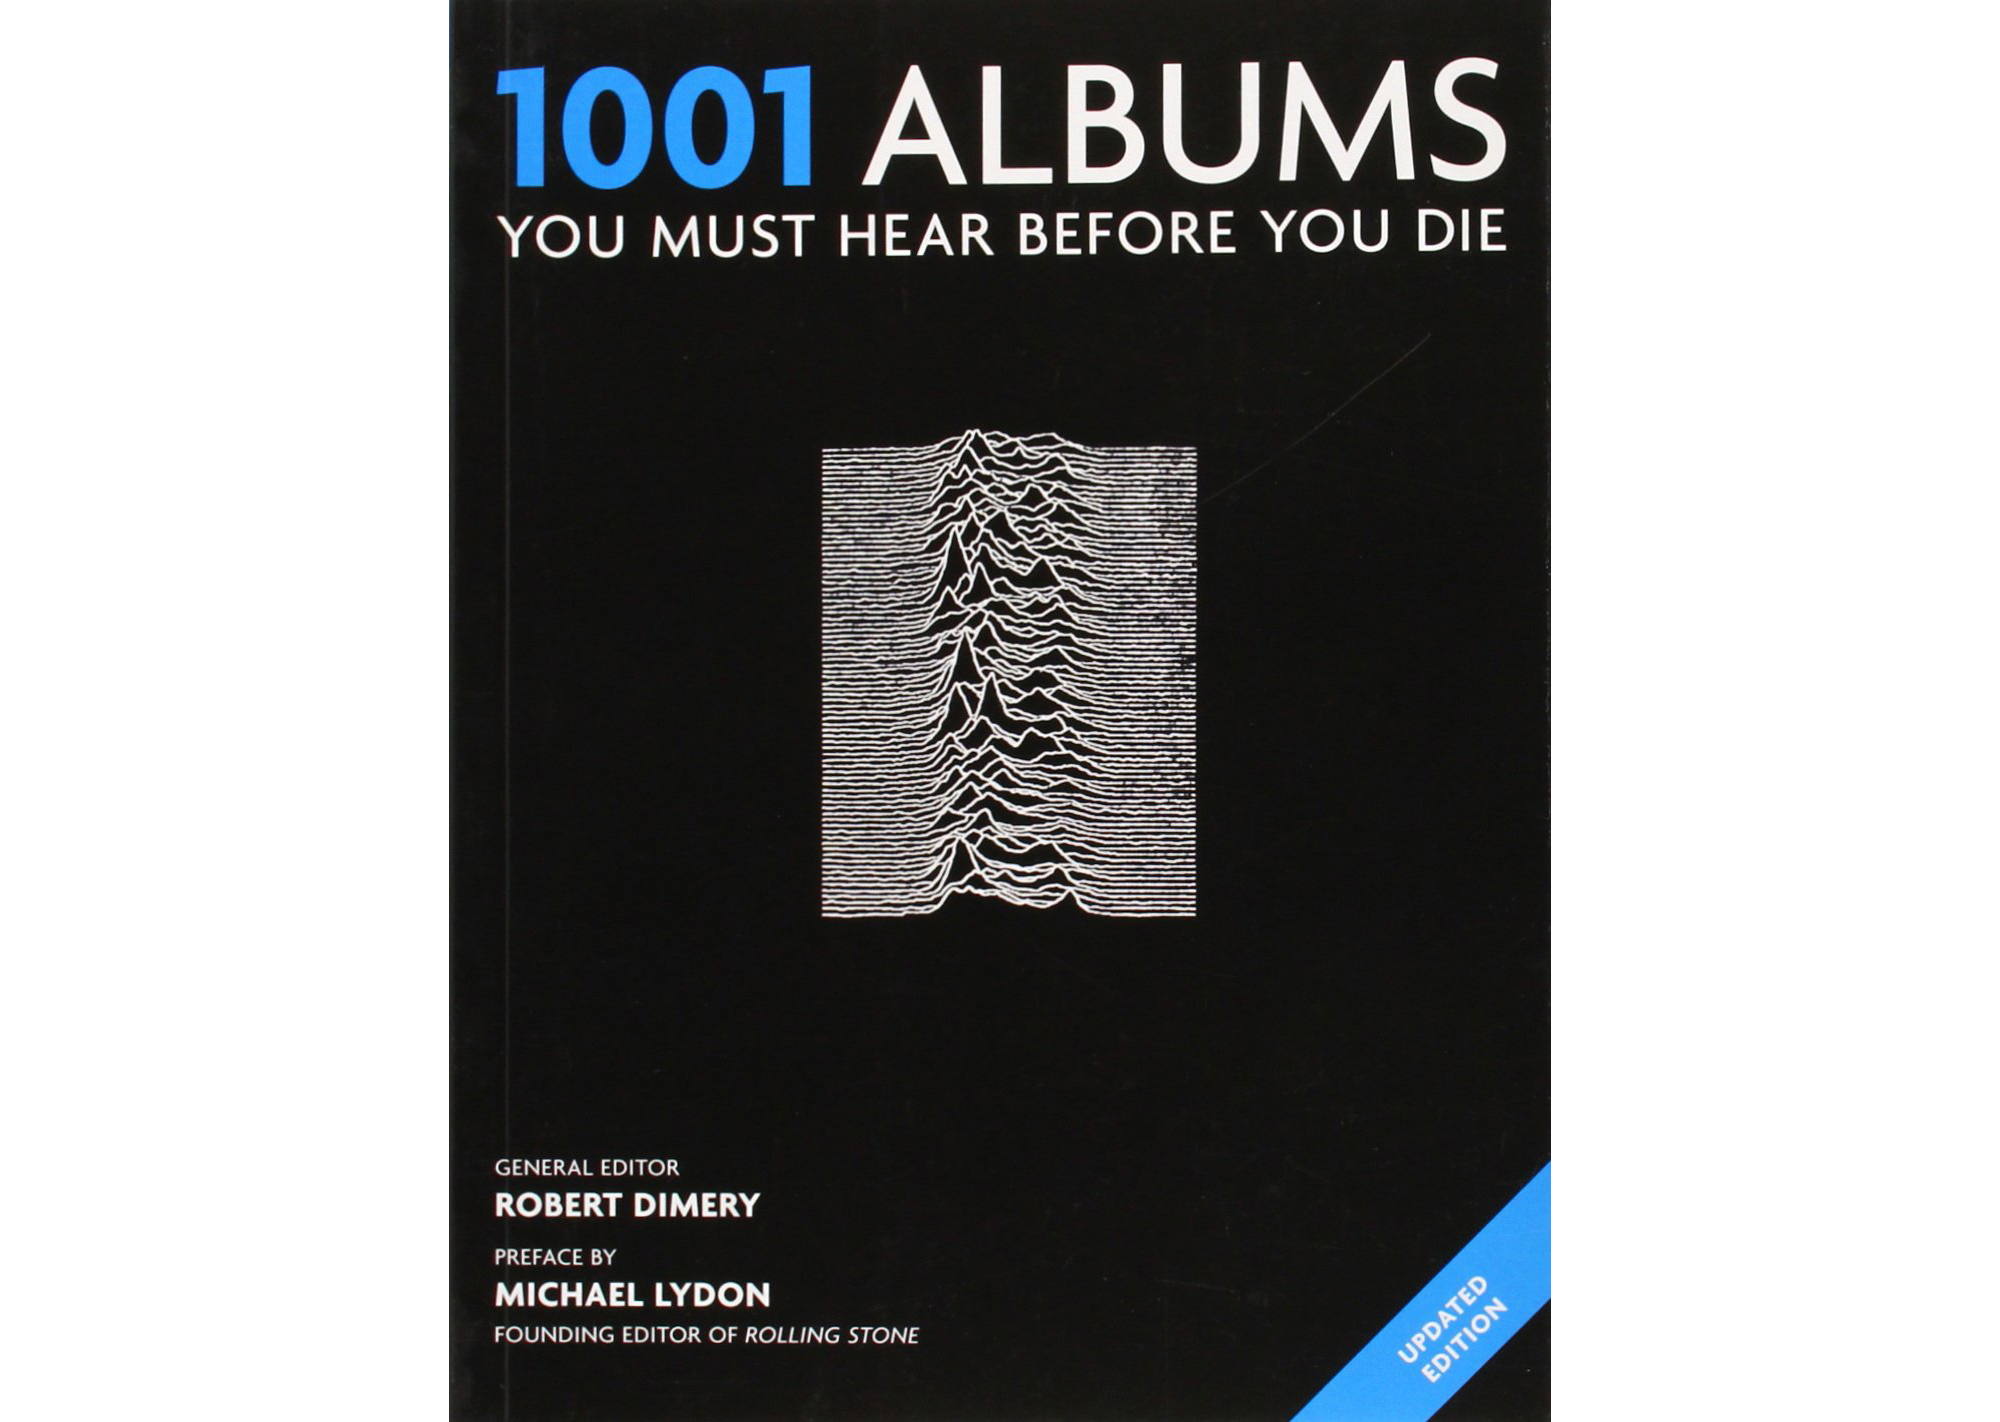 1001 Albums You Must Hear